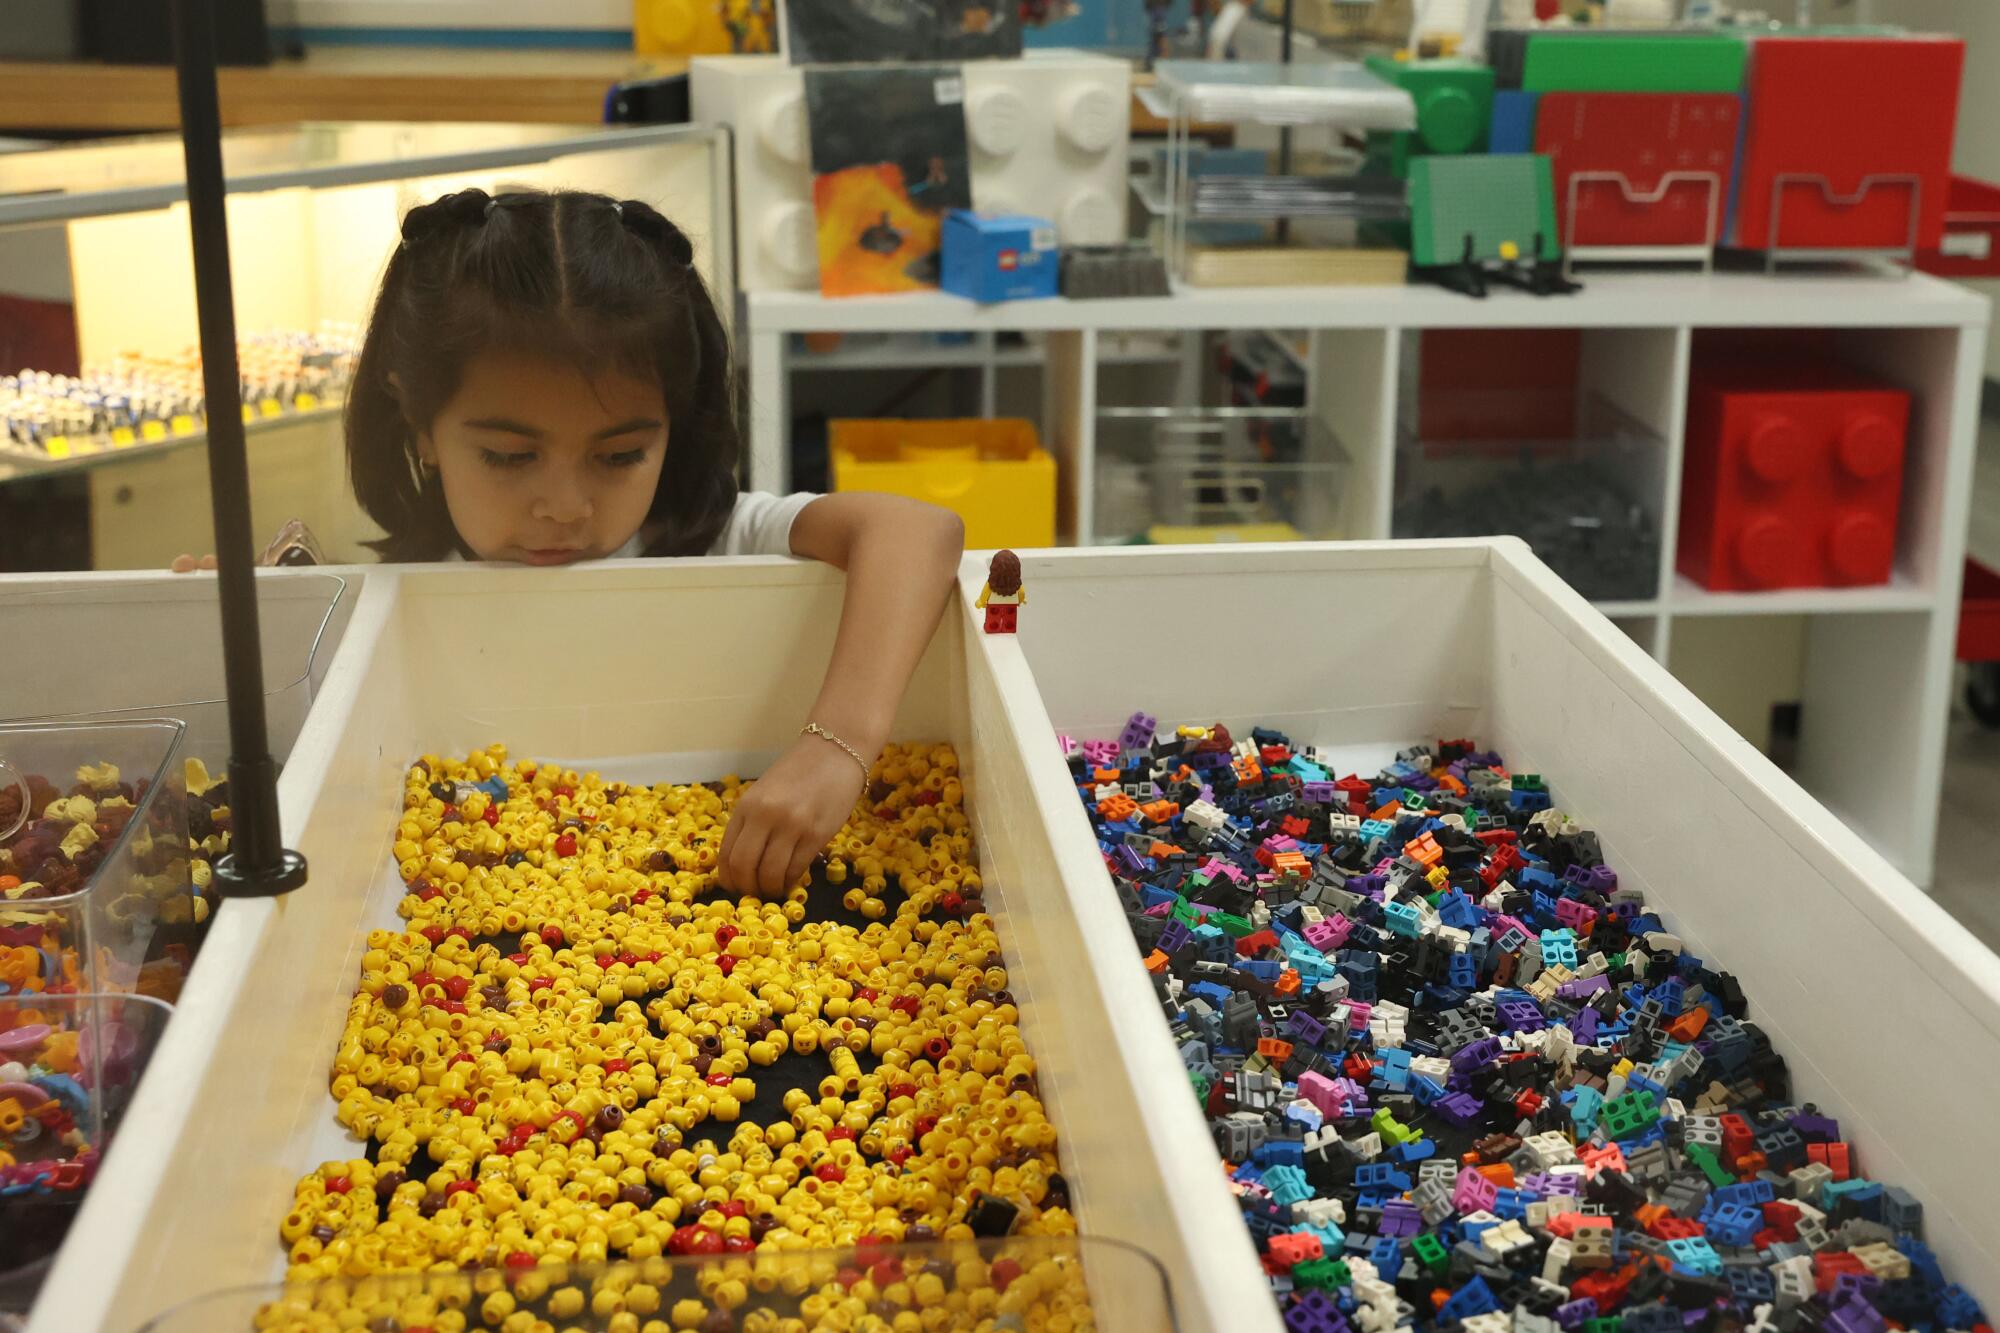 A child reaches into a bin with assorted Lego heads